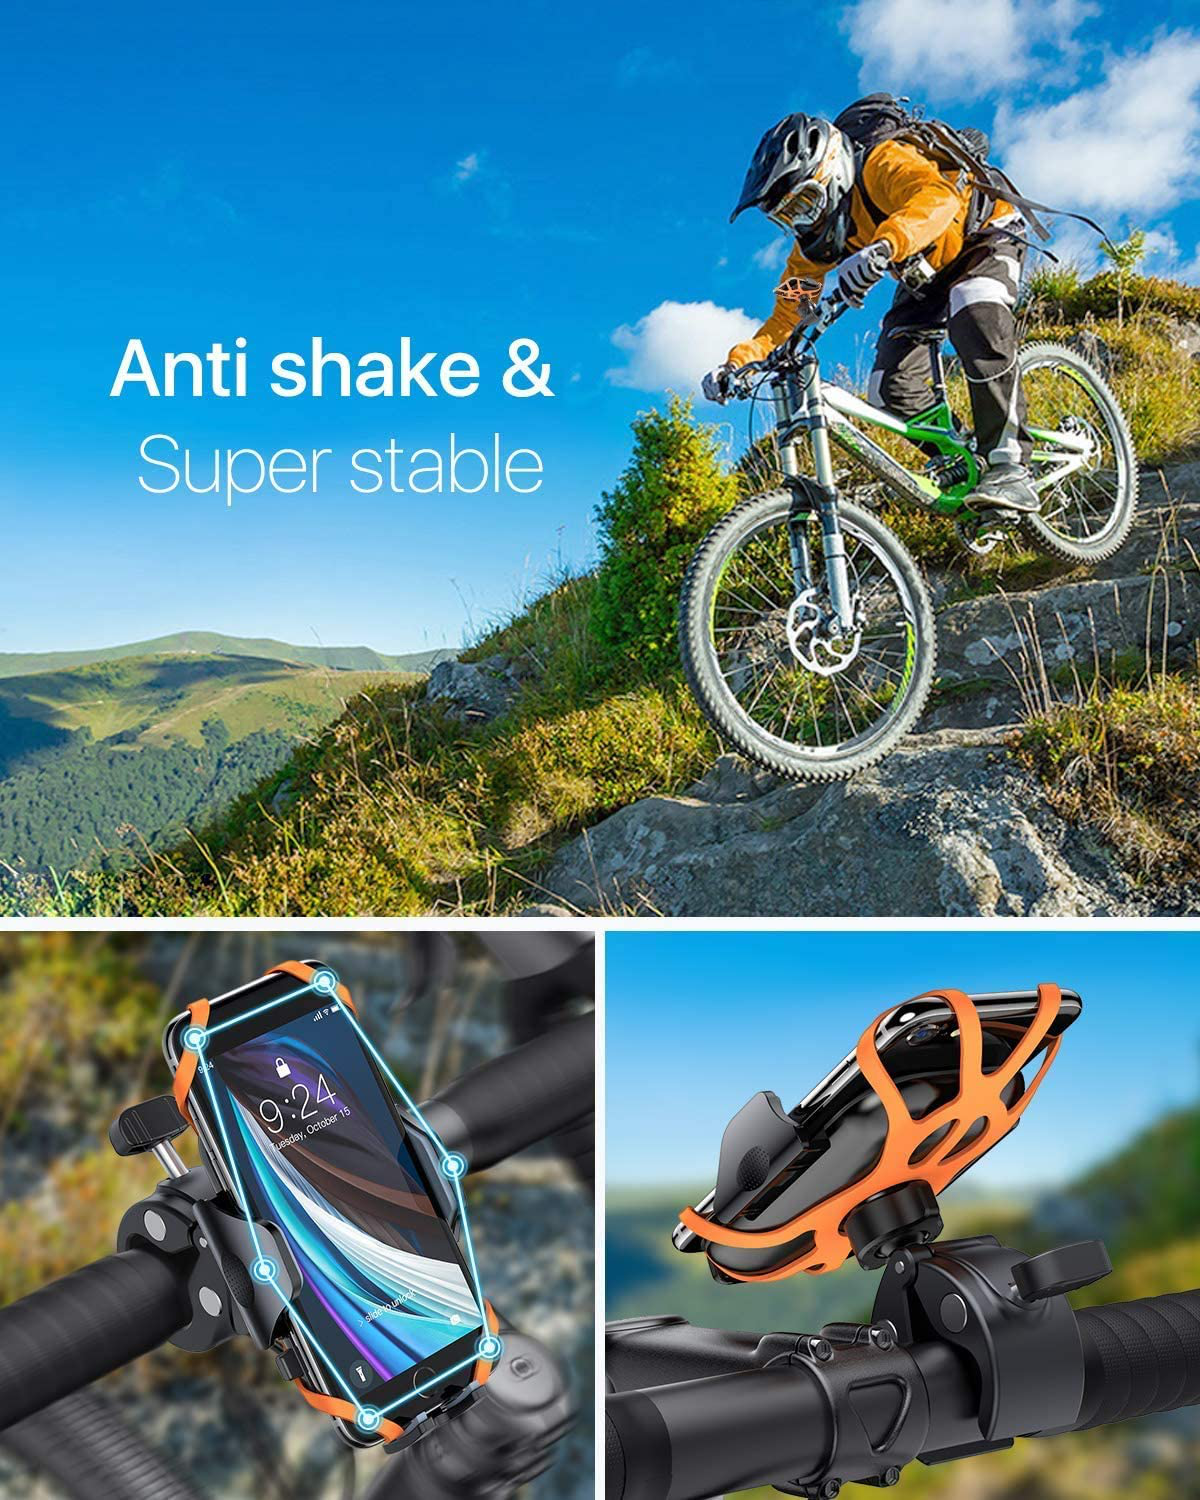 Andobil Bike Phone Mount Universal Handlebar Cell Phone Holder for Bike Motorcycle Compatible with iPhone and Galaxy